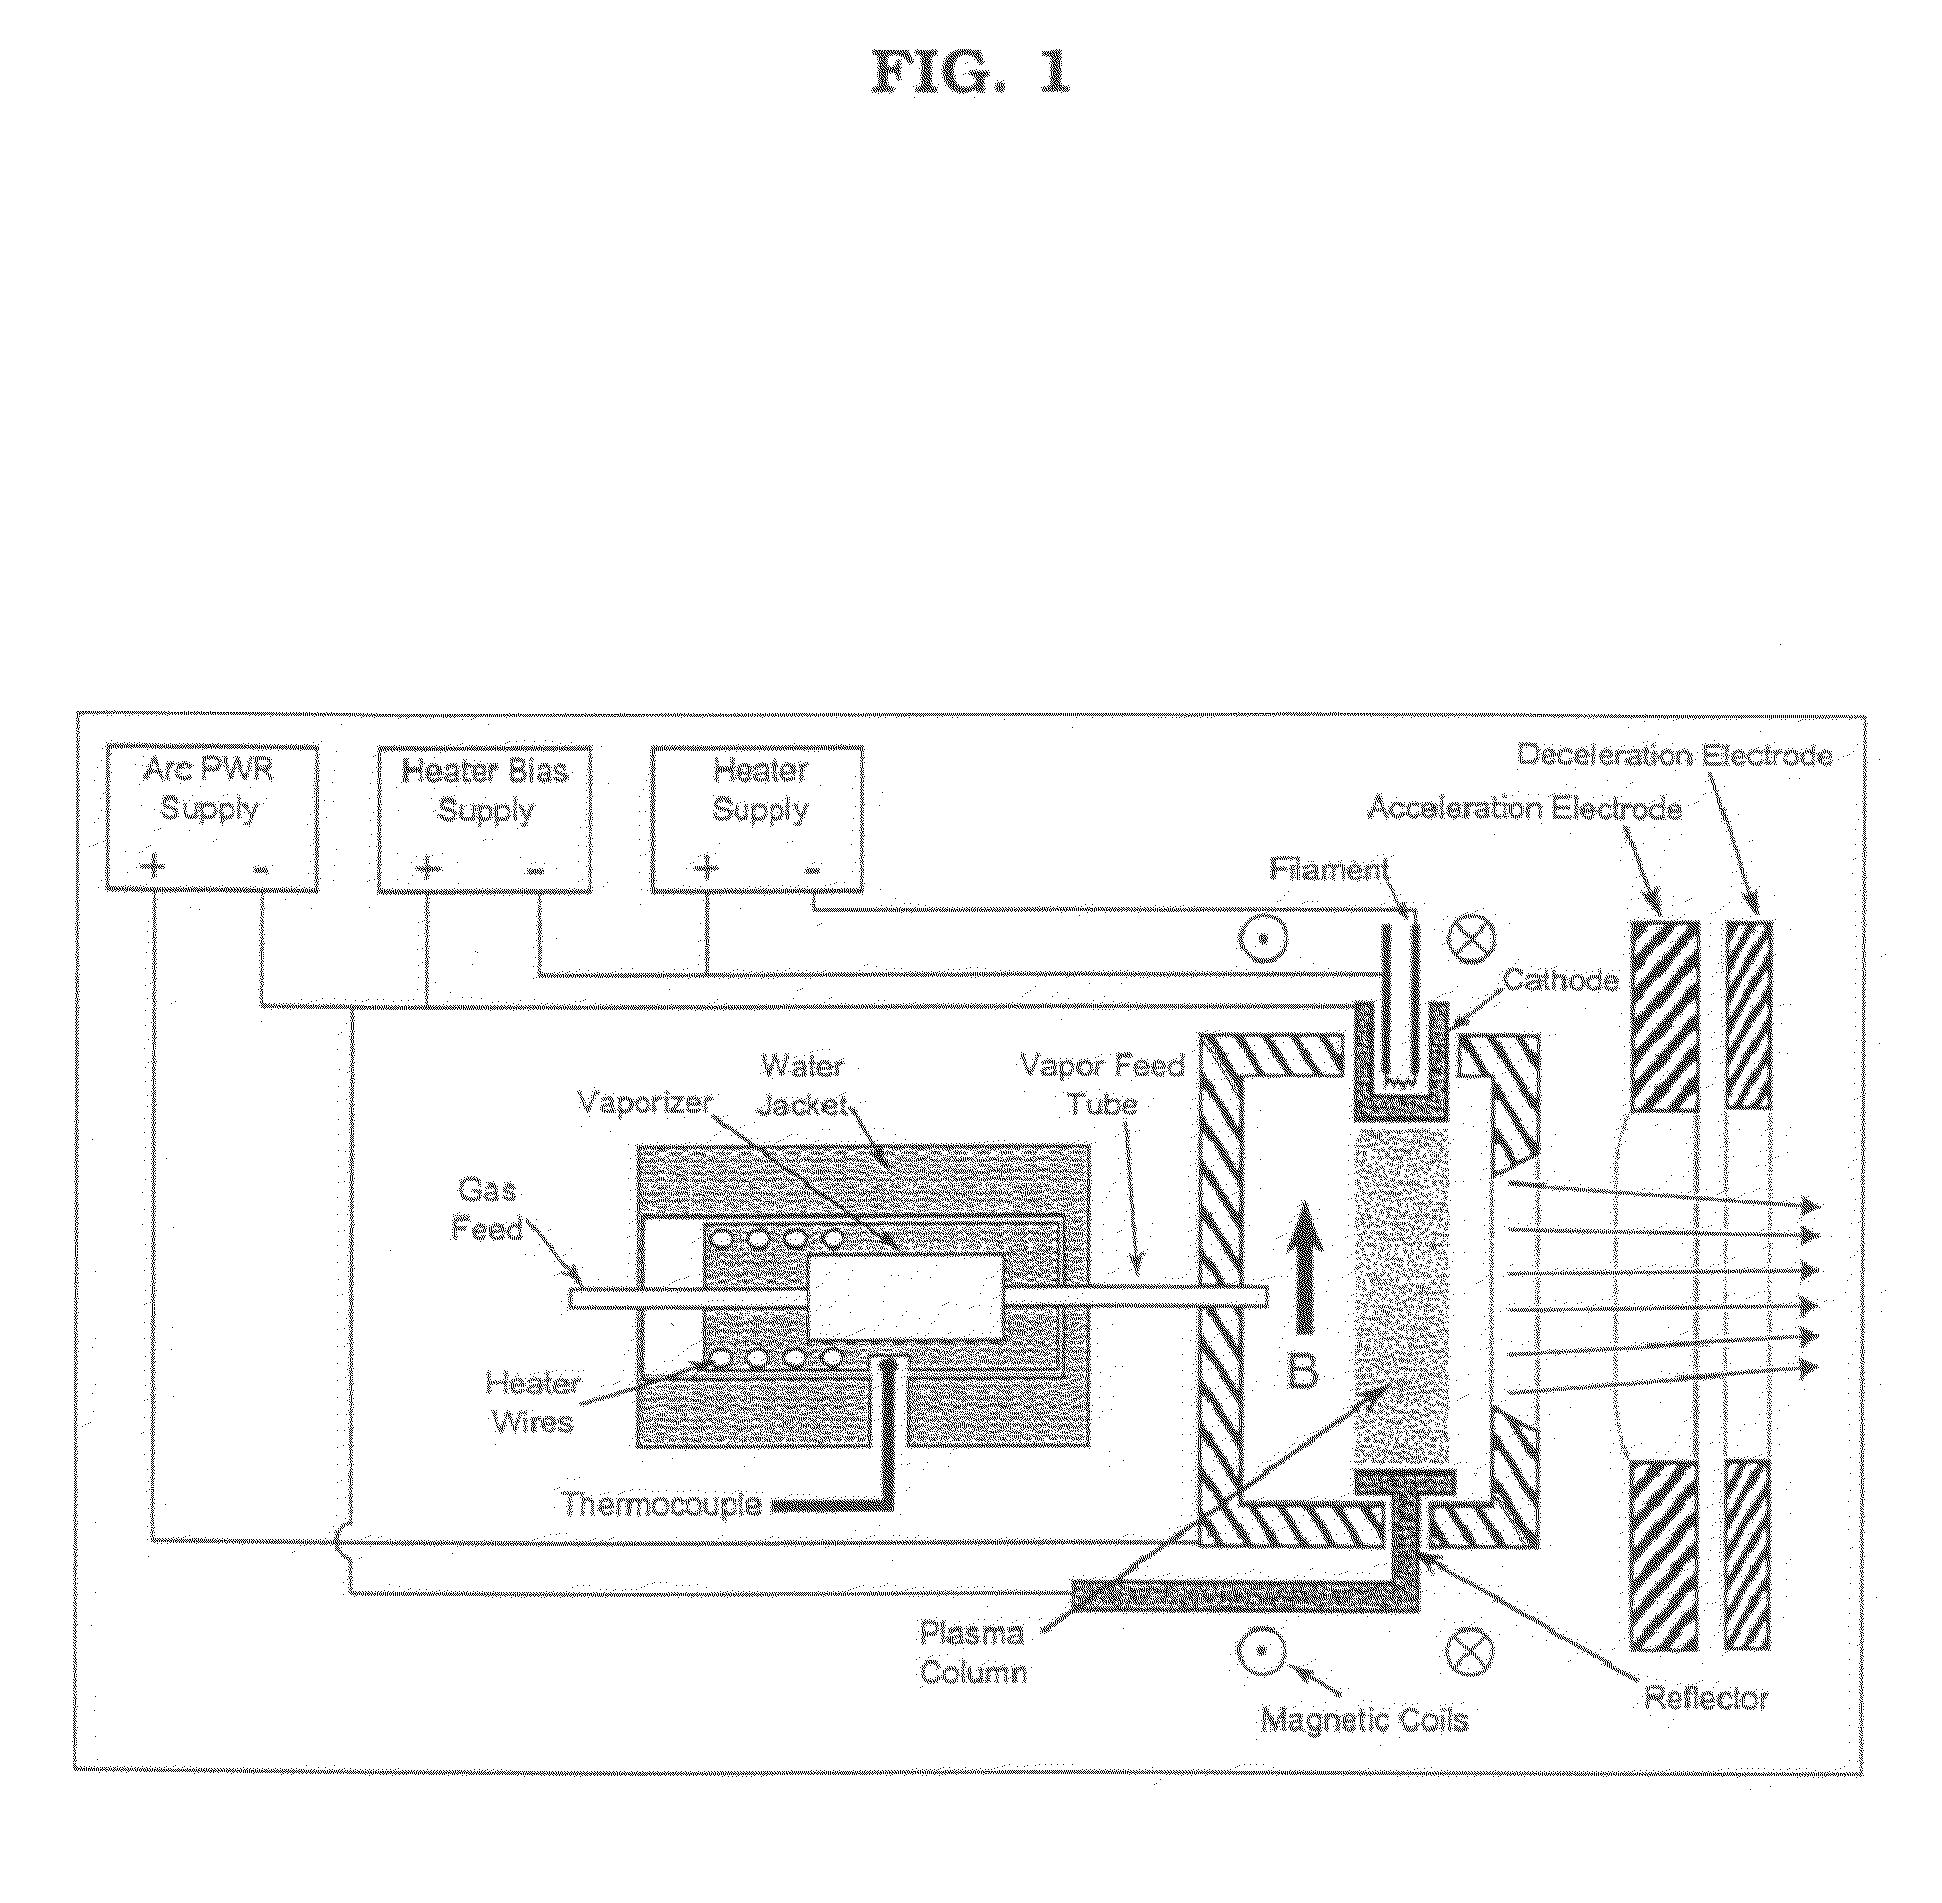 Method and apparatus for isolating the radioisotope molybdenum-99